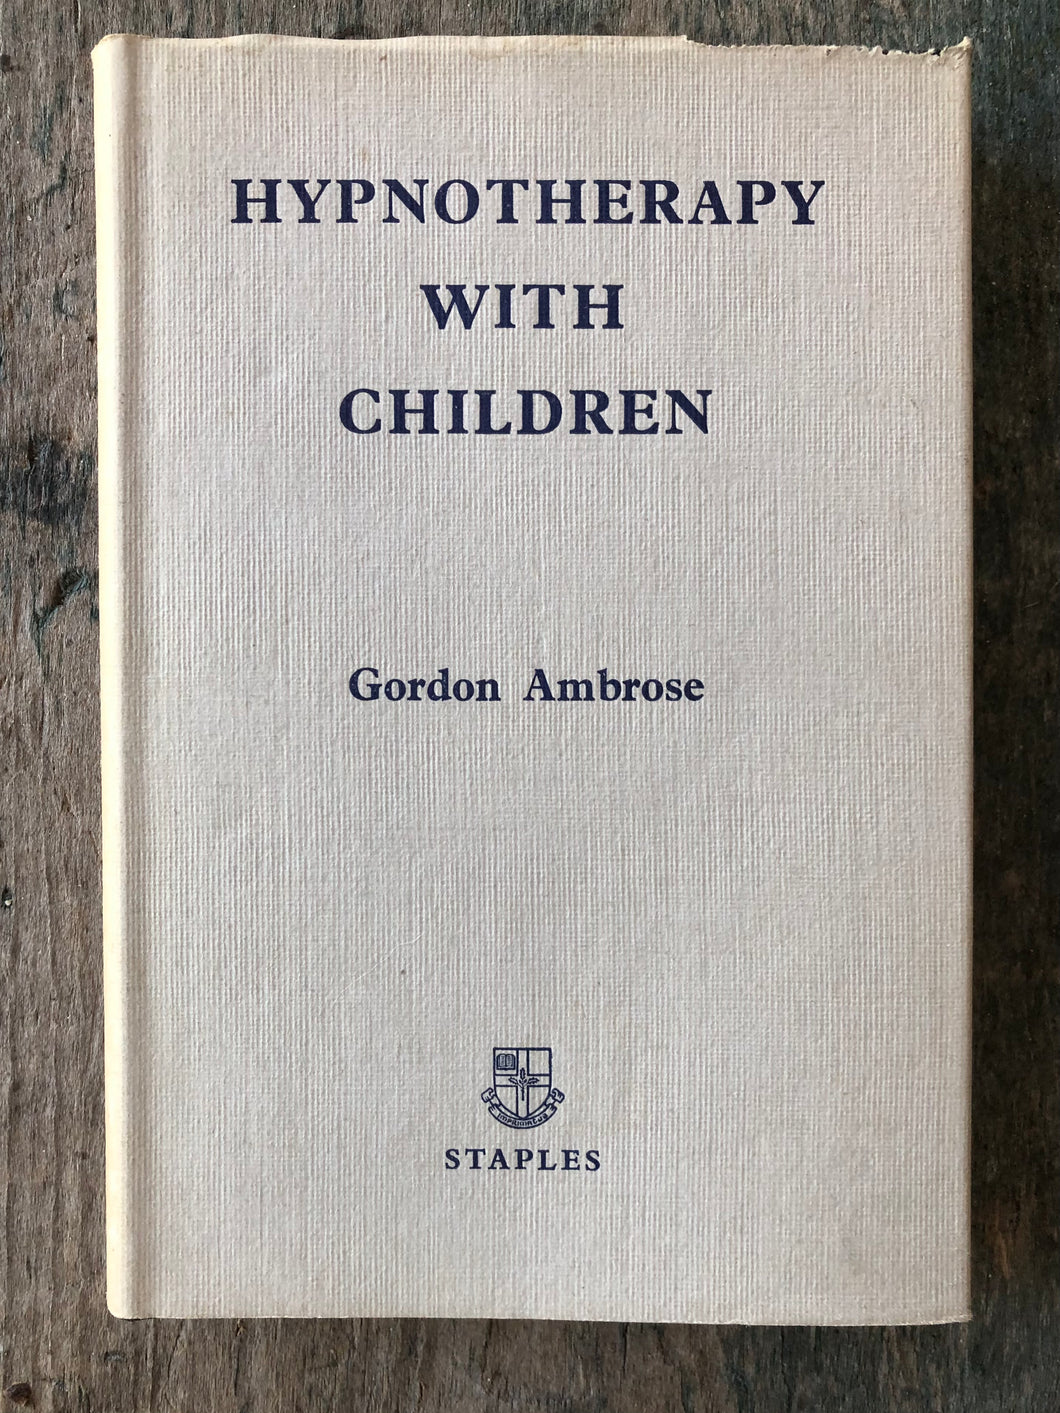 Hypnotherapy with Children: An Introduction to Child Guidance and Treatment by Hypnosis for Practitioners and Students by Gordon Ambrose